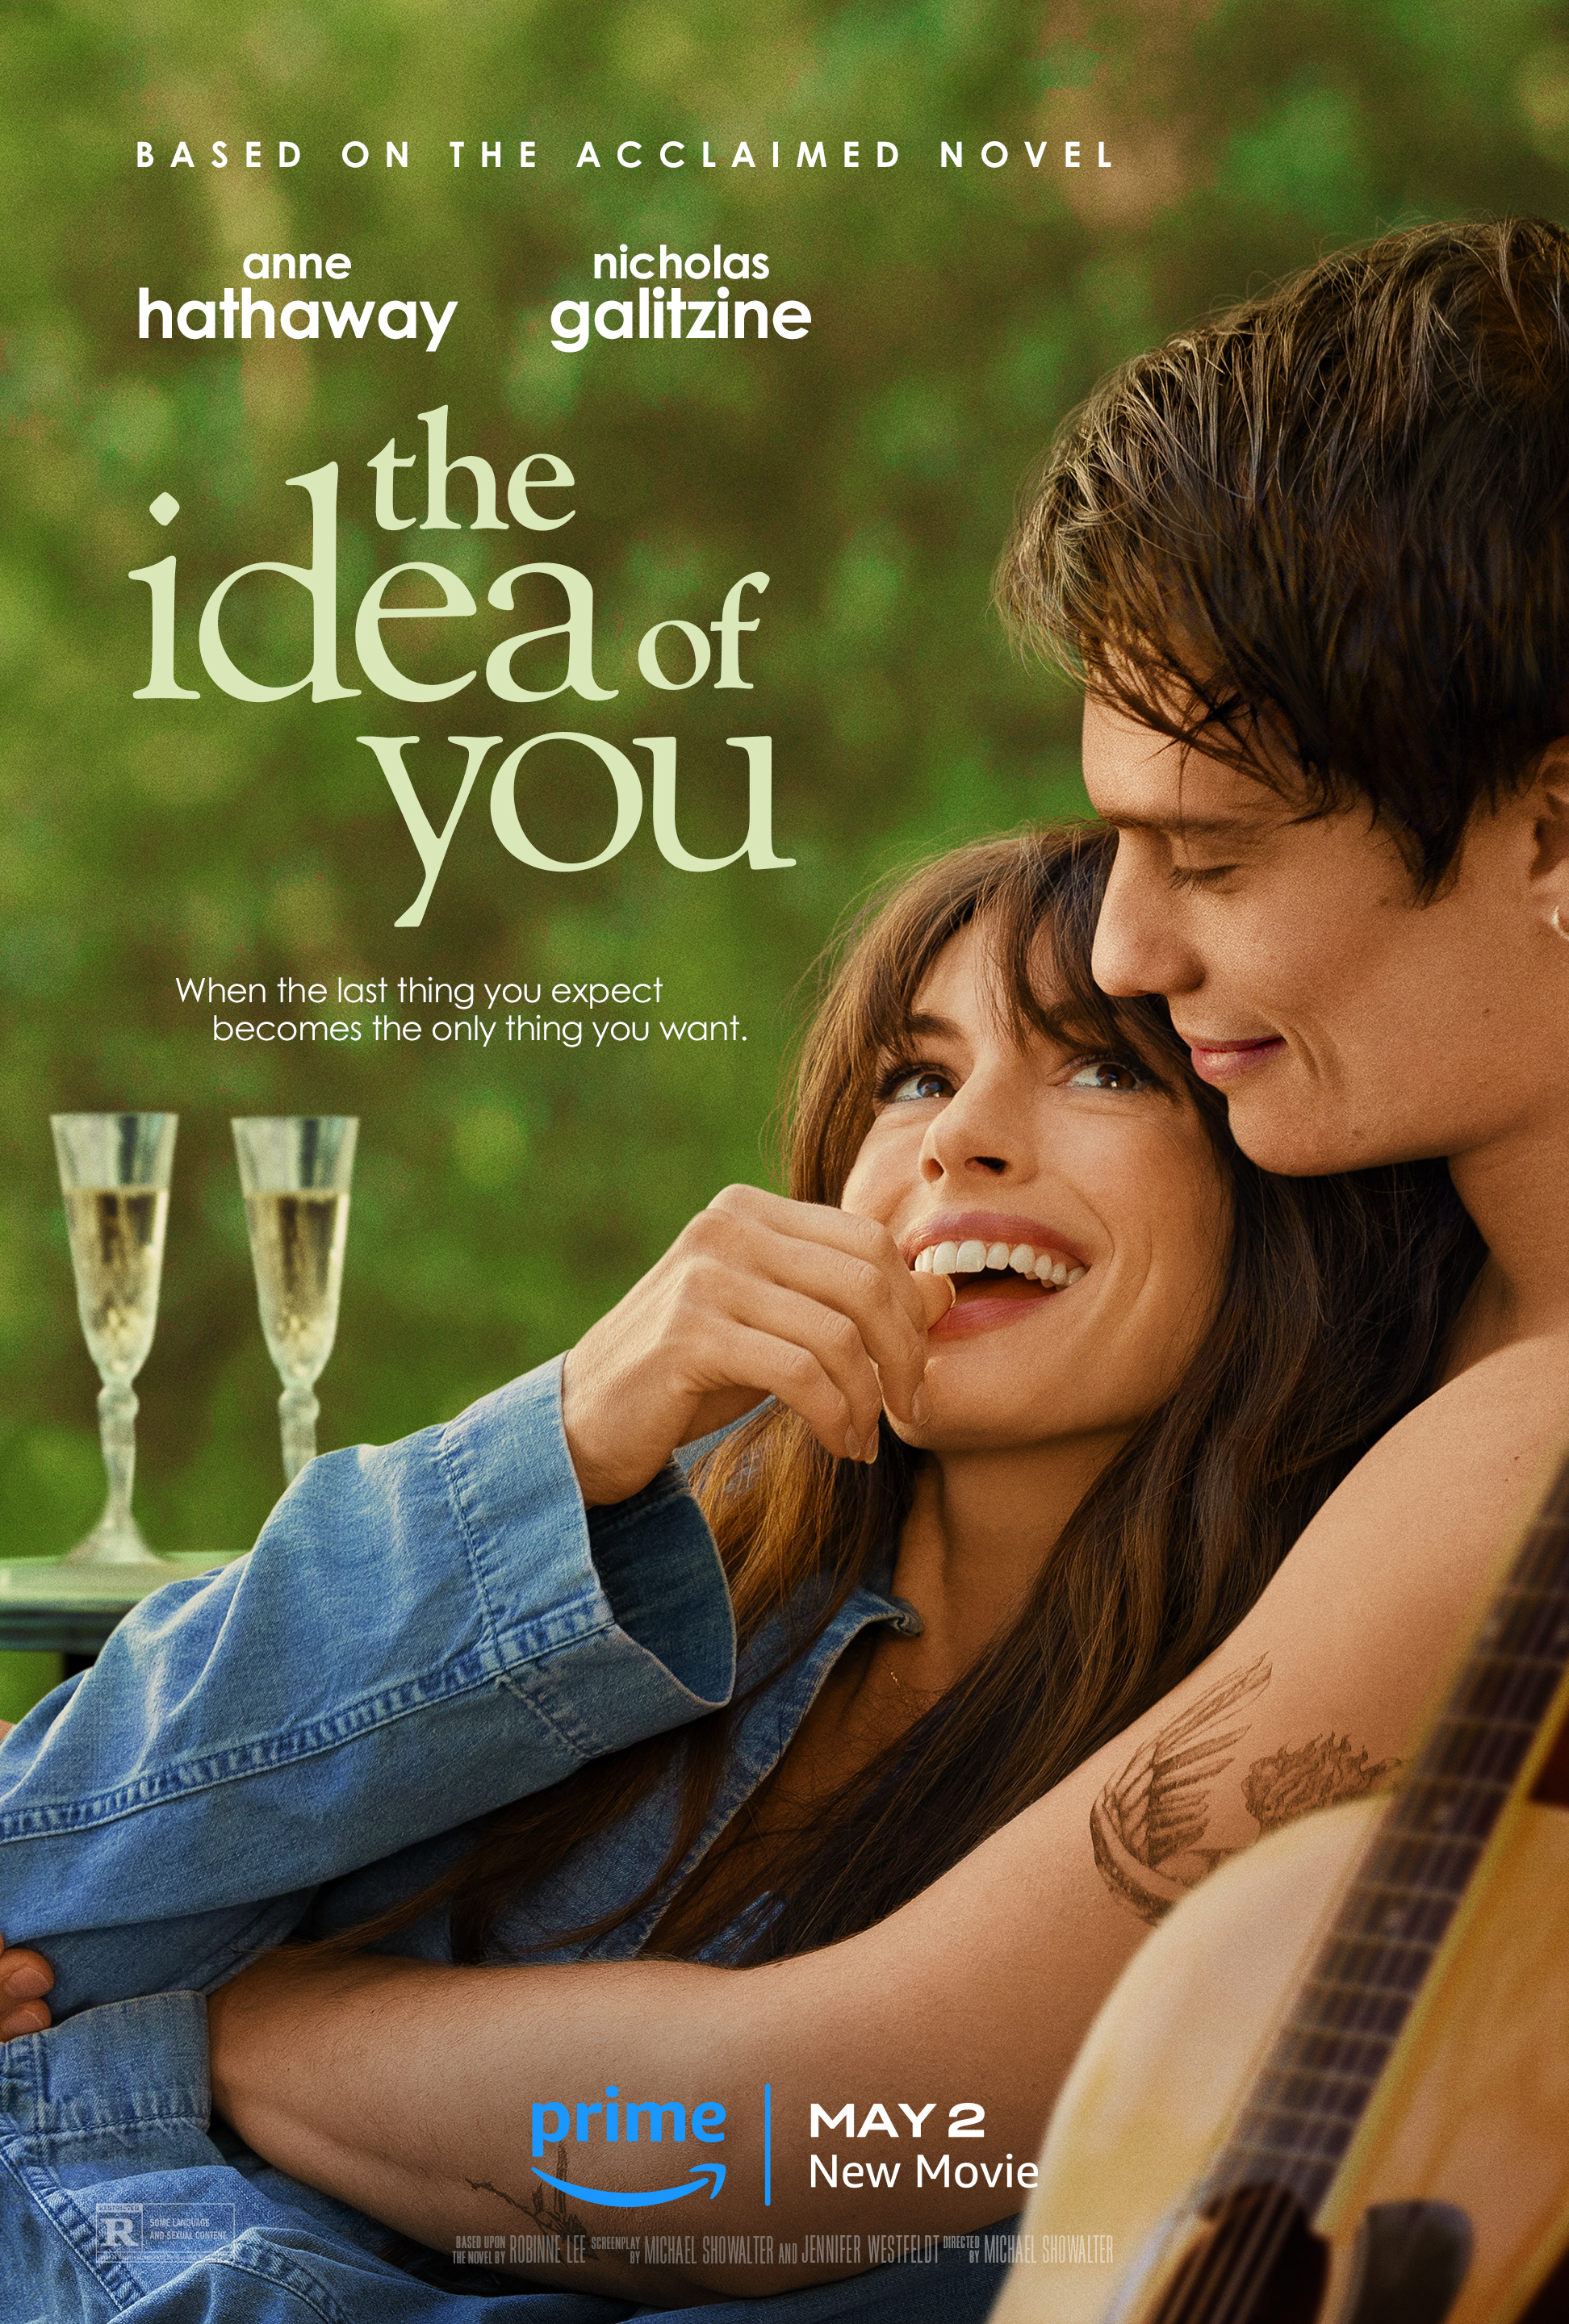 Movie poster for &quot;The Idea of You&quot; starring Anne Hathaway and Nicholas Galitzine, releasing May 2